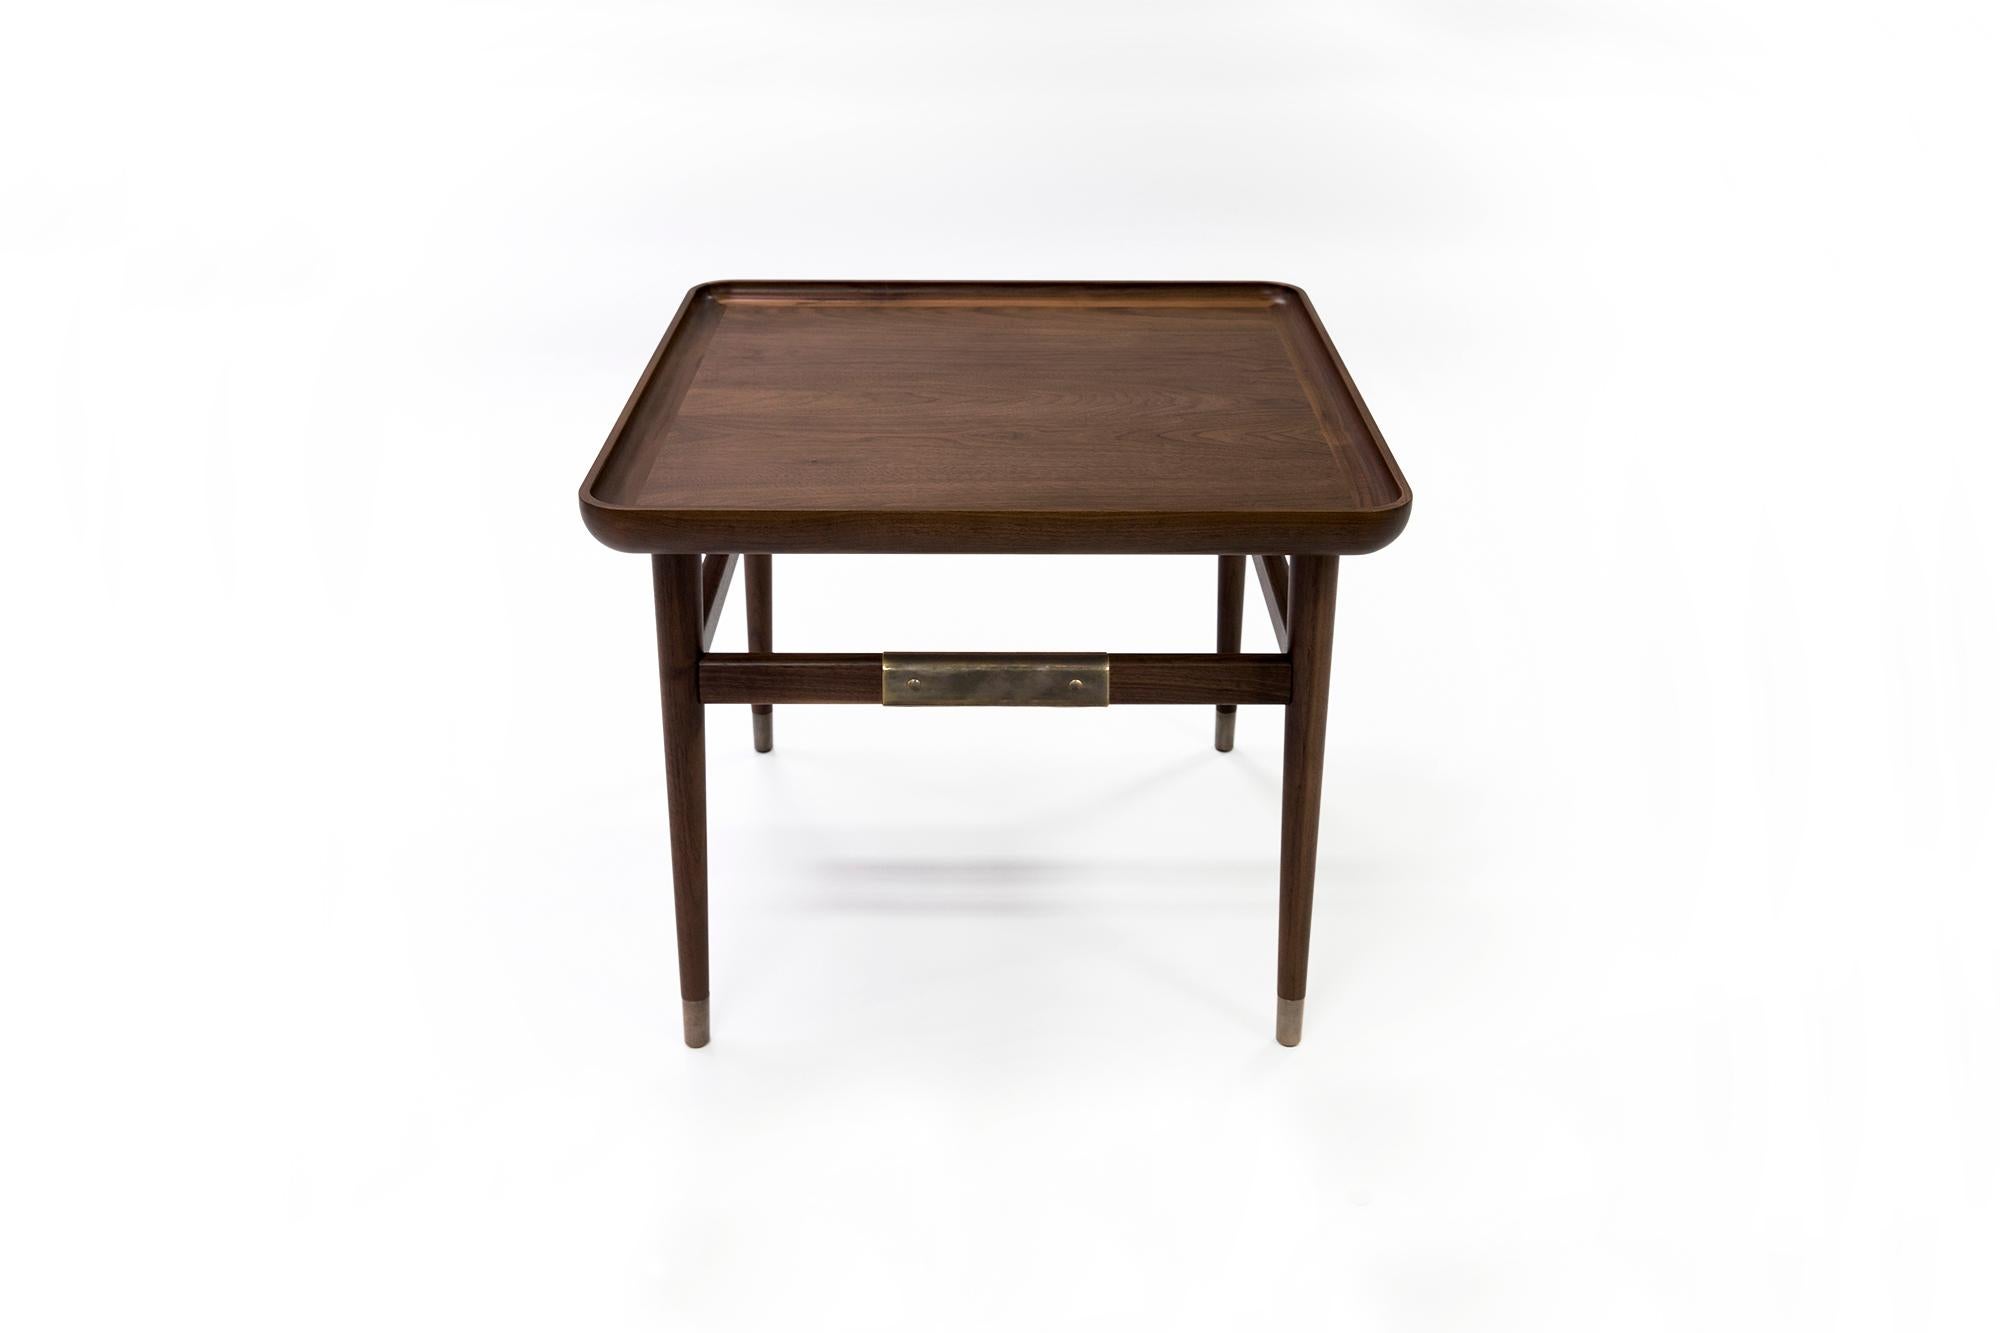 American Oslo Rectangular Side Table in Medium Walnut with Antique Brass Fittings For Sale